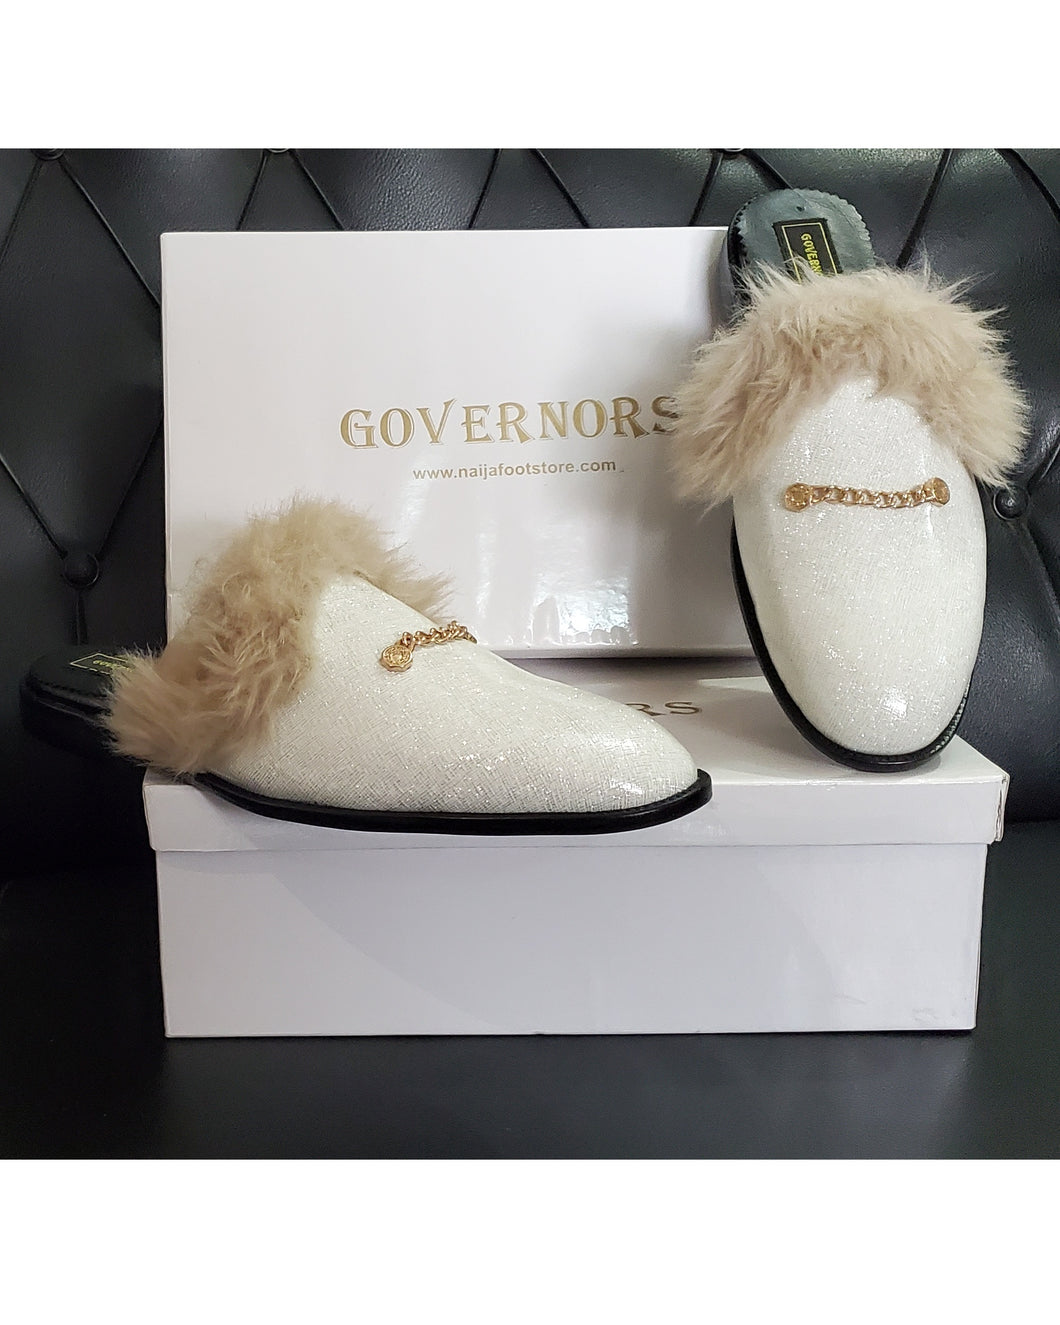 GLITTERY GOVERNORS HALFSHOE SLIP-ONS WITH FUR